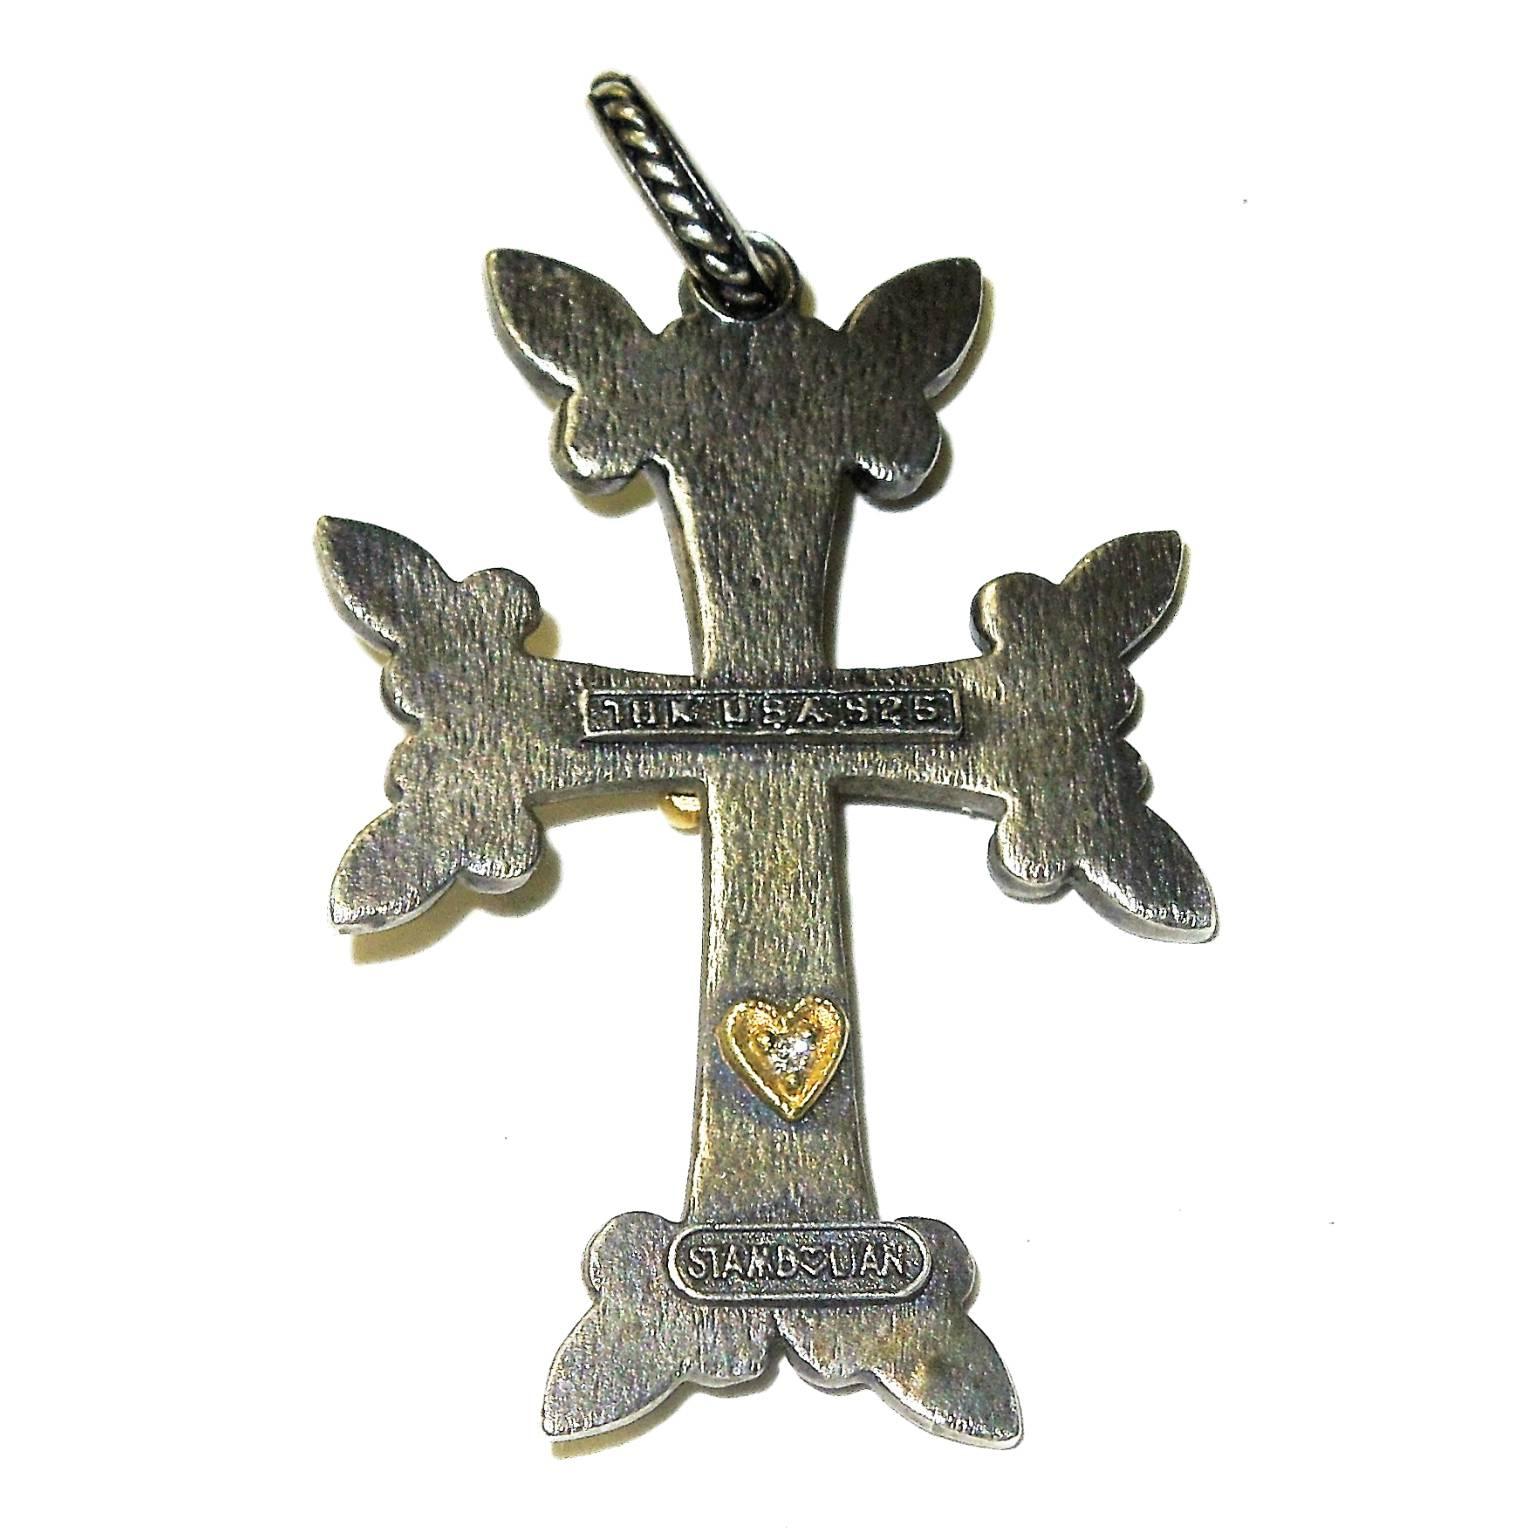 Aged Silver Cross with 18K Gold center with diamond

1.7 inch length

Single diamond center

Signed STAMBOLIAN with our Trademark "Diamond Heart"

Proudly Made in USA